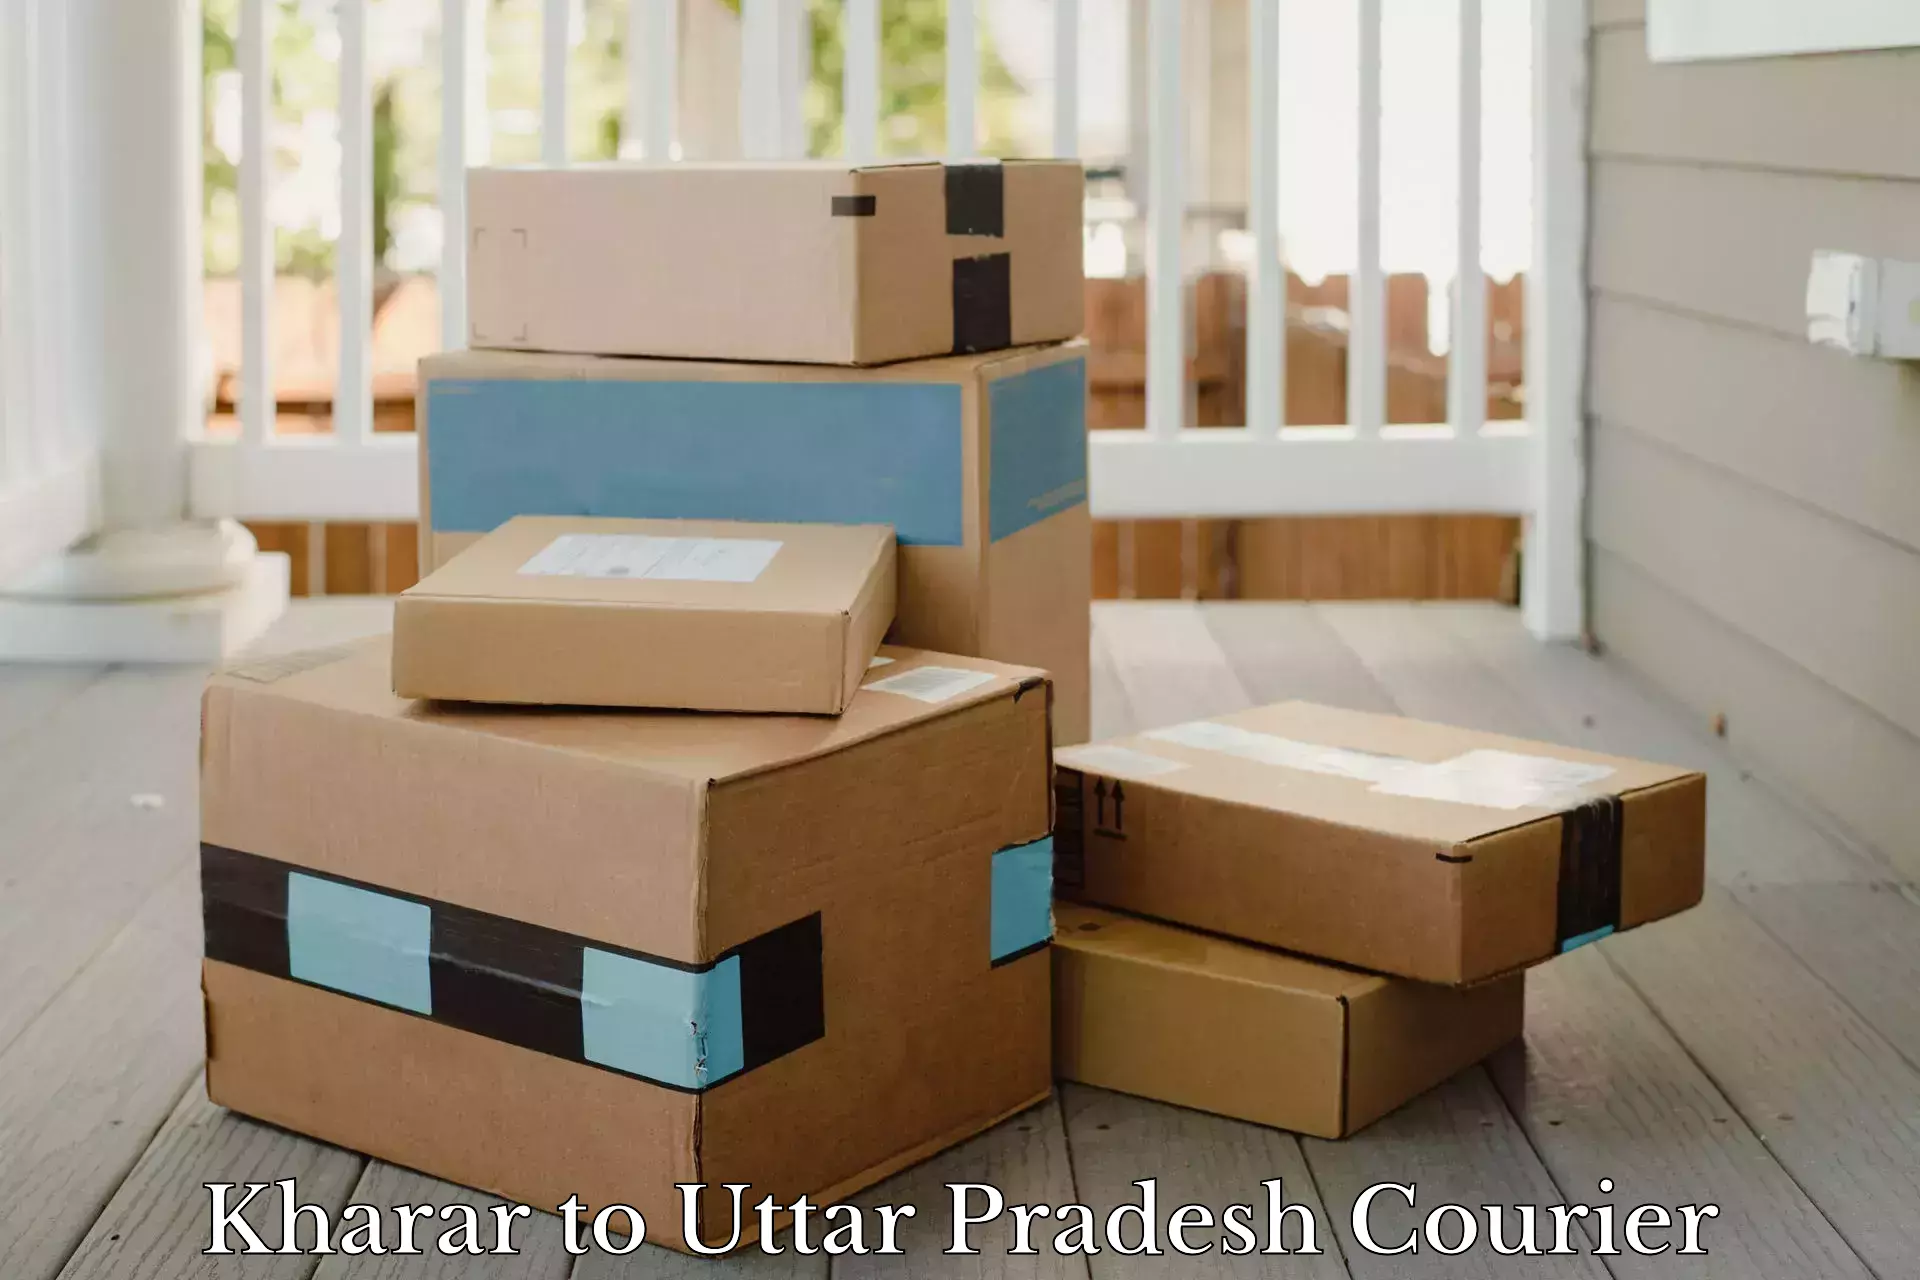 Courier service comparison in Kharar to IIT Kanpur